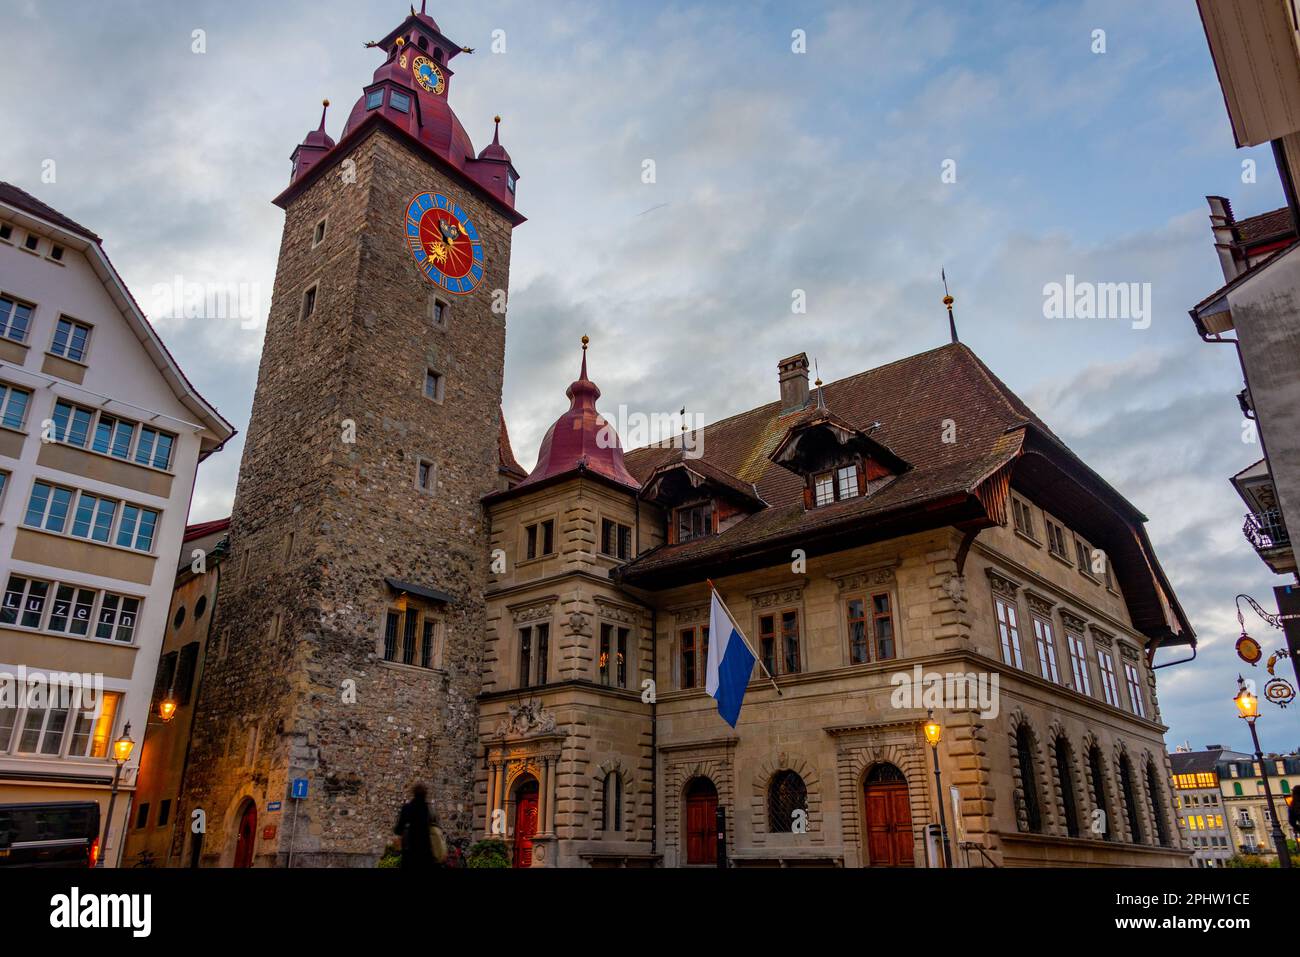 Night view of a town hall in the old town of Luzern, Switzerland. Stock Photo